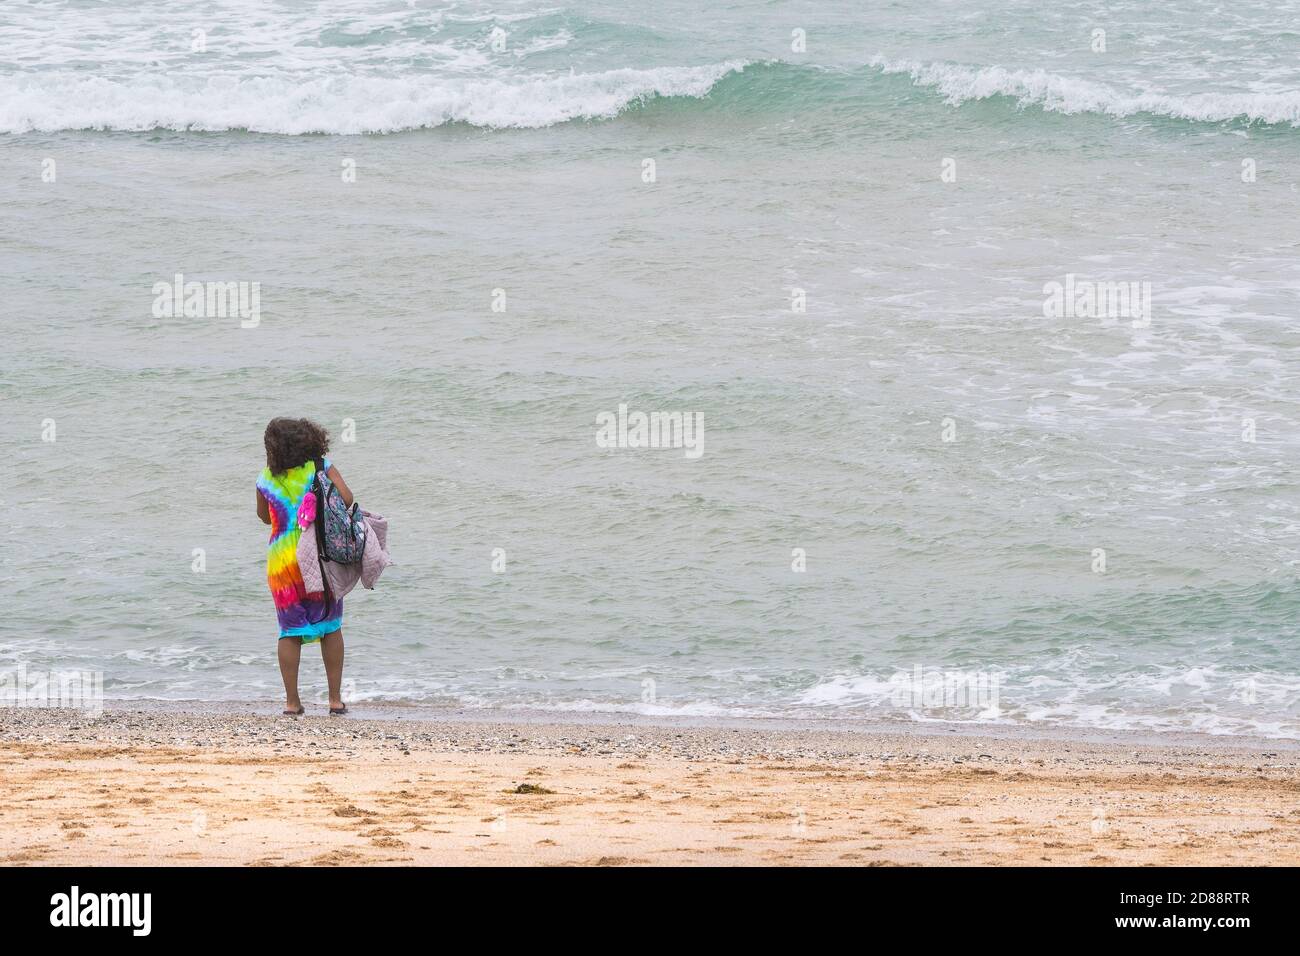 A holidaymaker on a staycation holiday wearing a colourful dress standing on the shore line on Fistral Beach in Newquay in Cornwall. Stock Photo